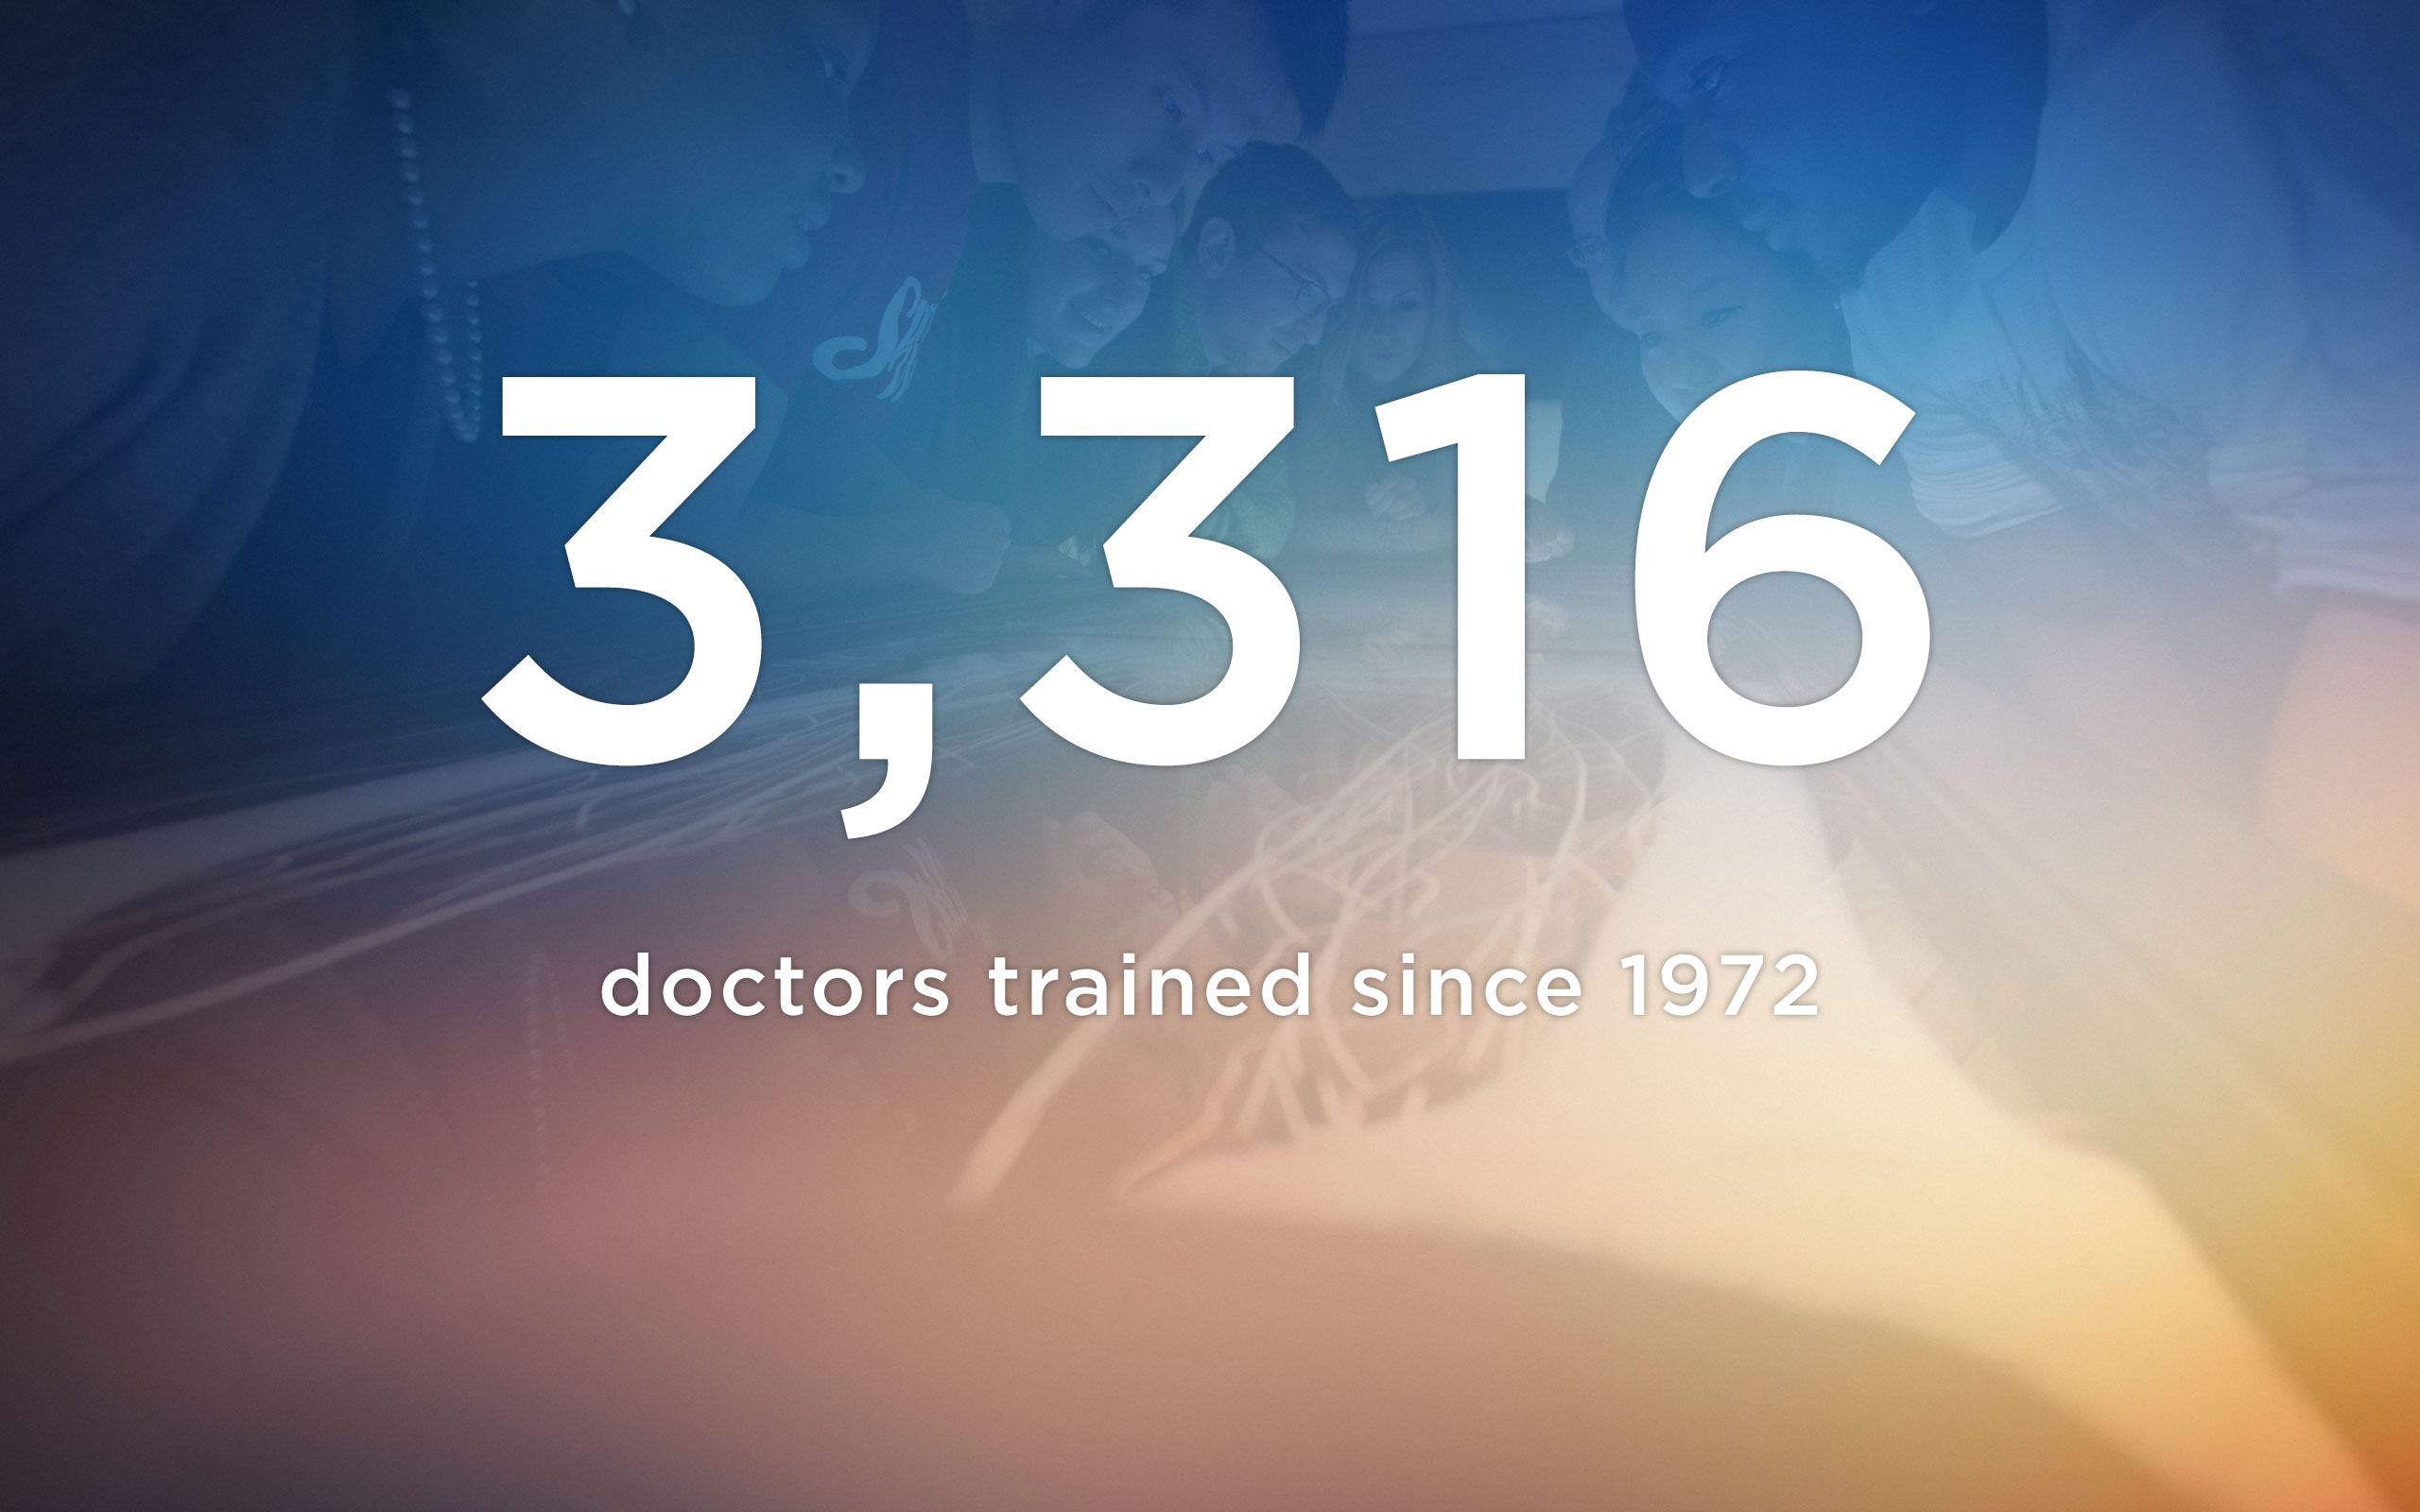 3316 – number of doctors trained since 1972 (as of class of 2015)